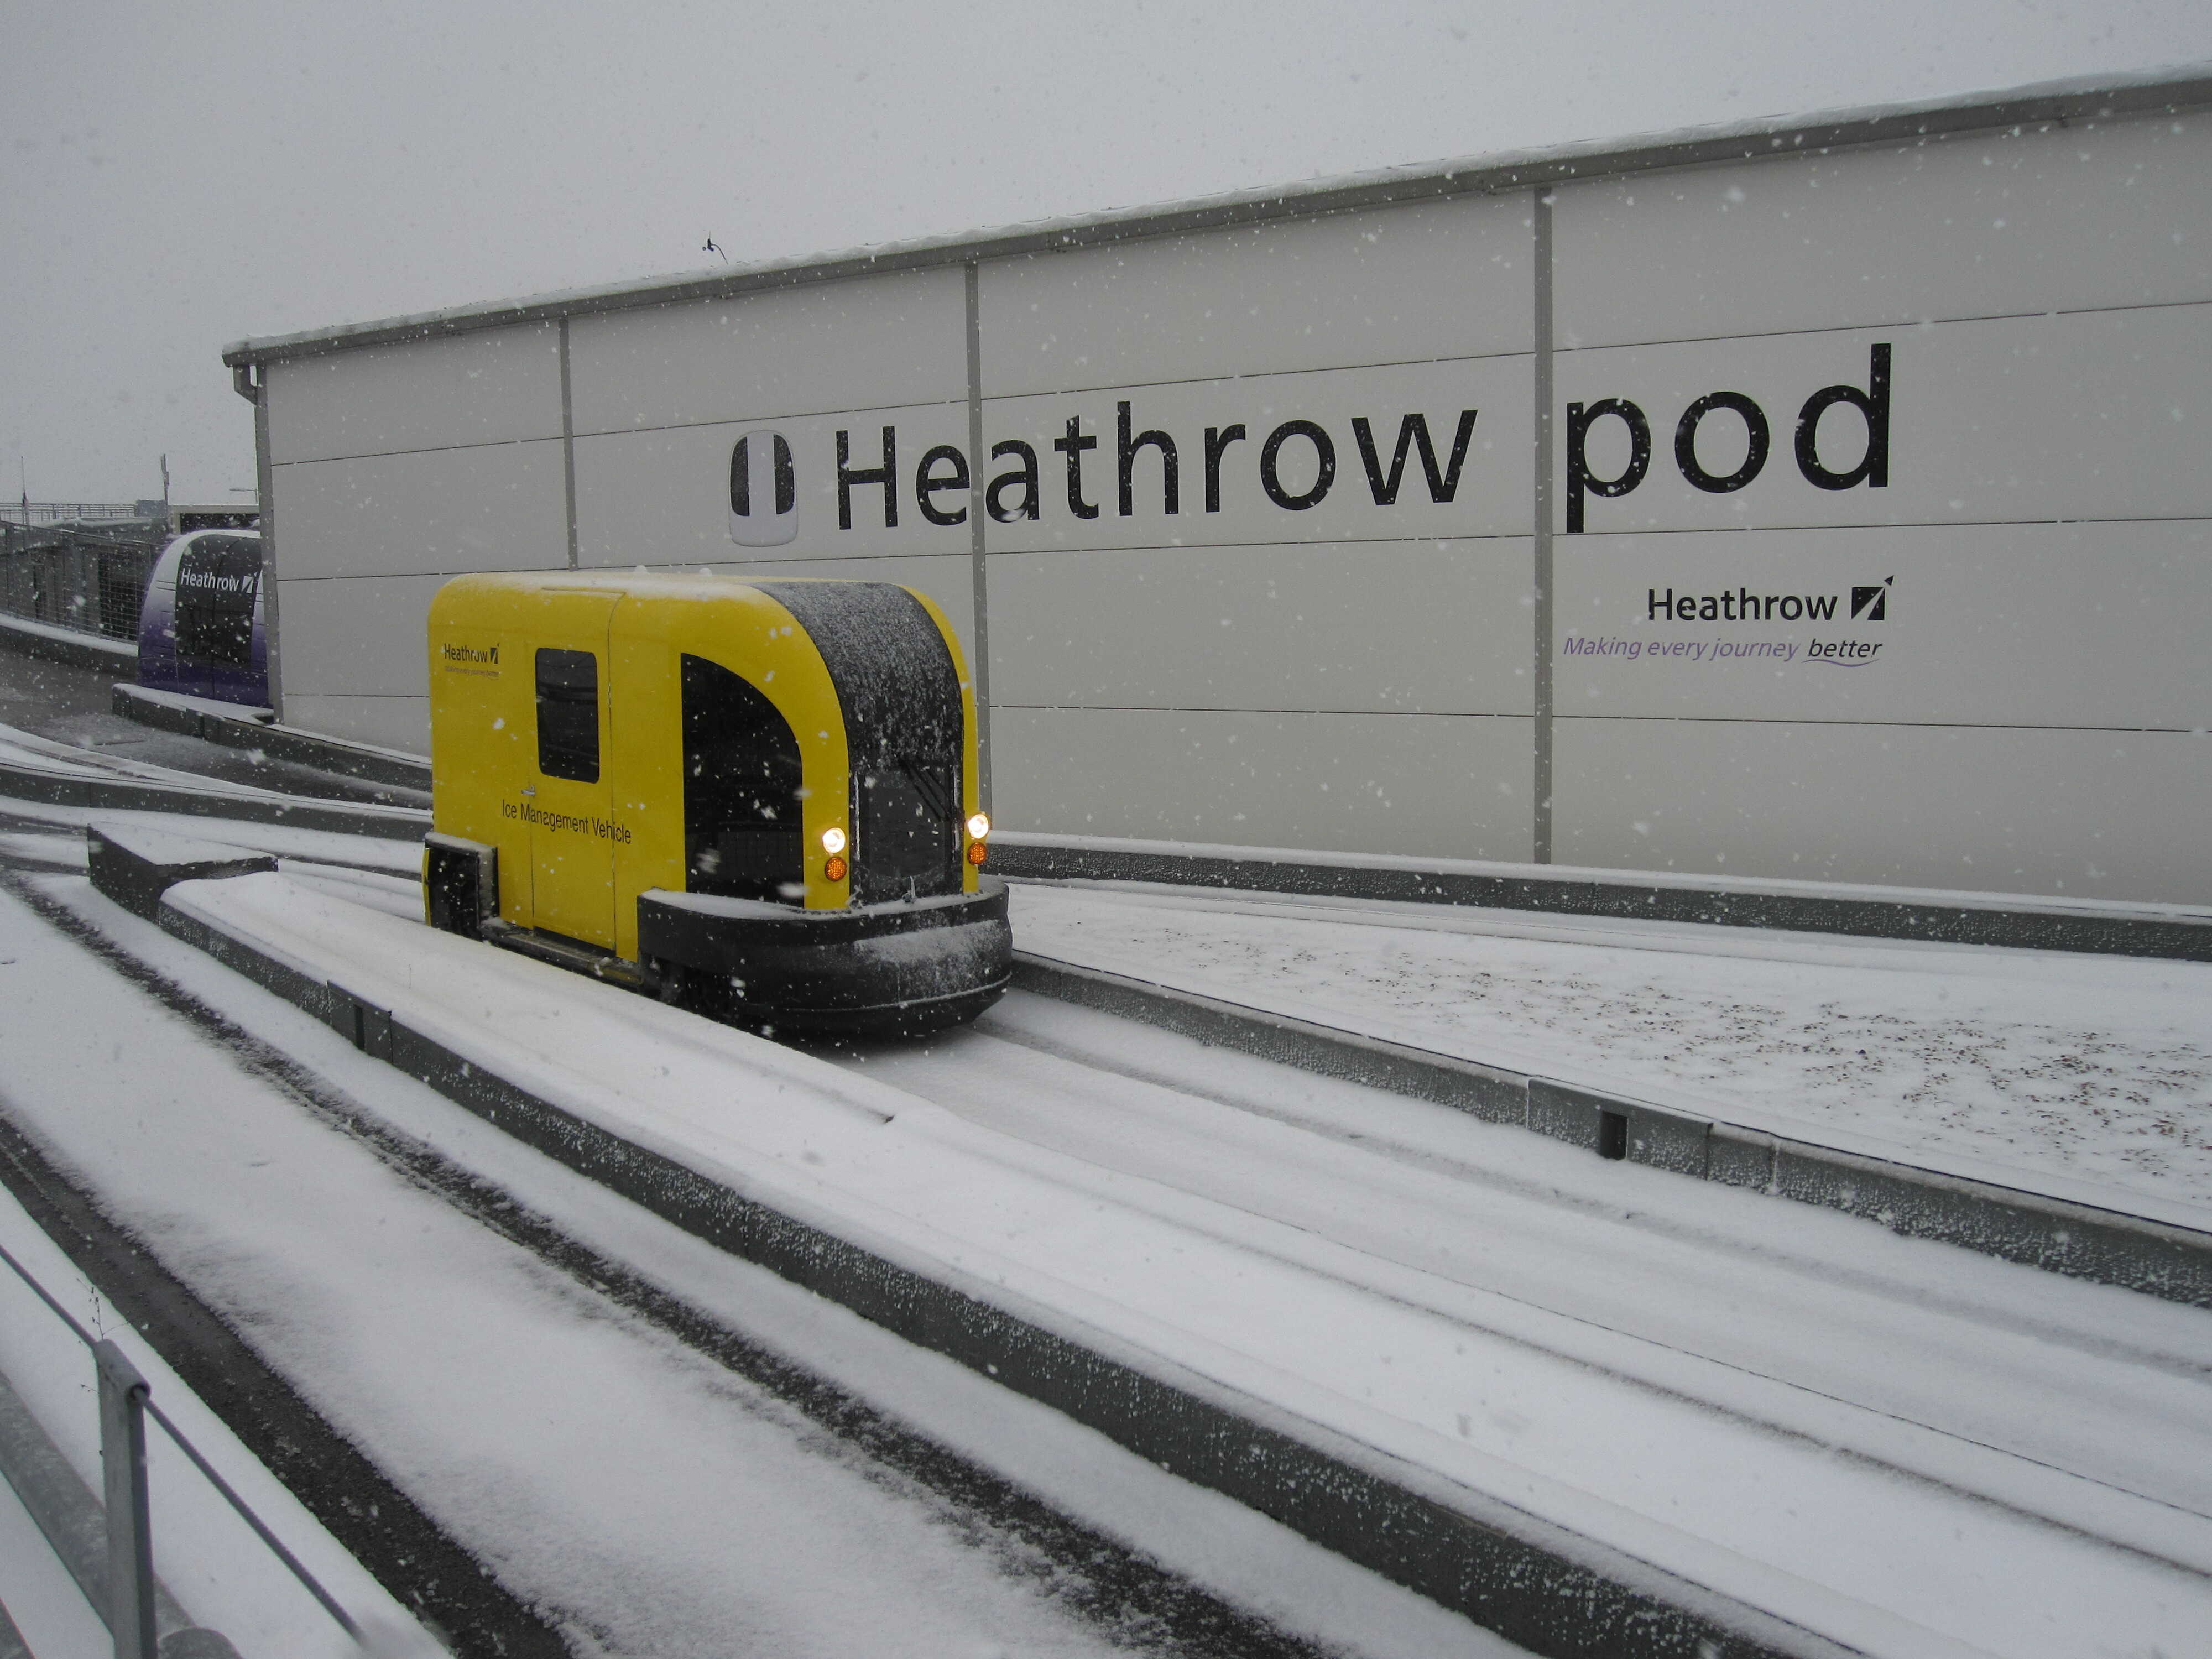 driverless pod in the snow